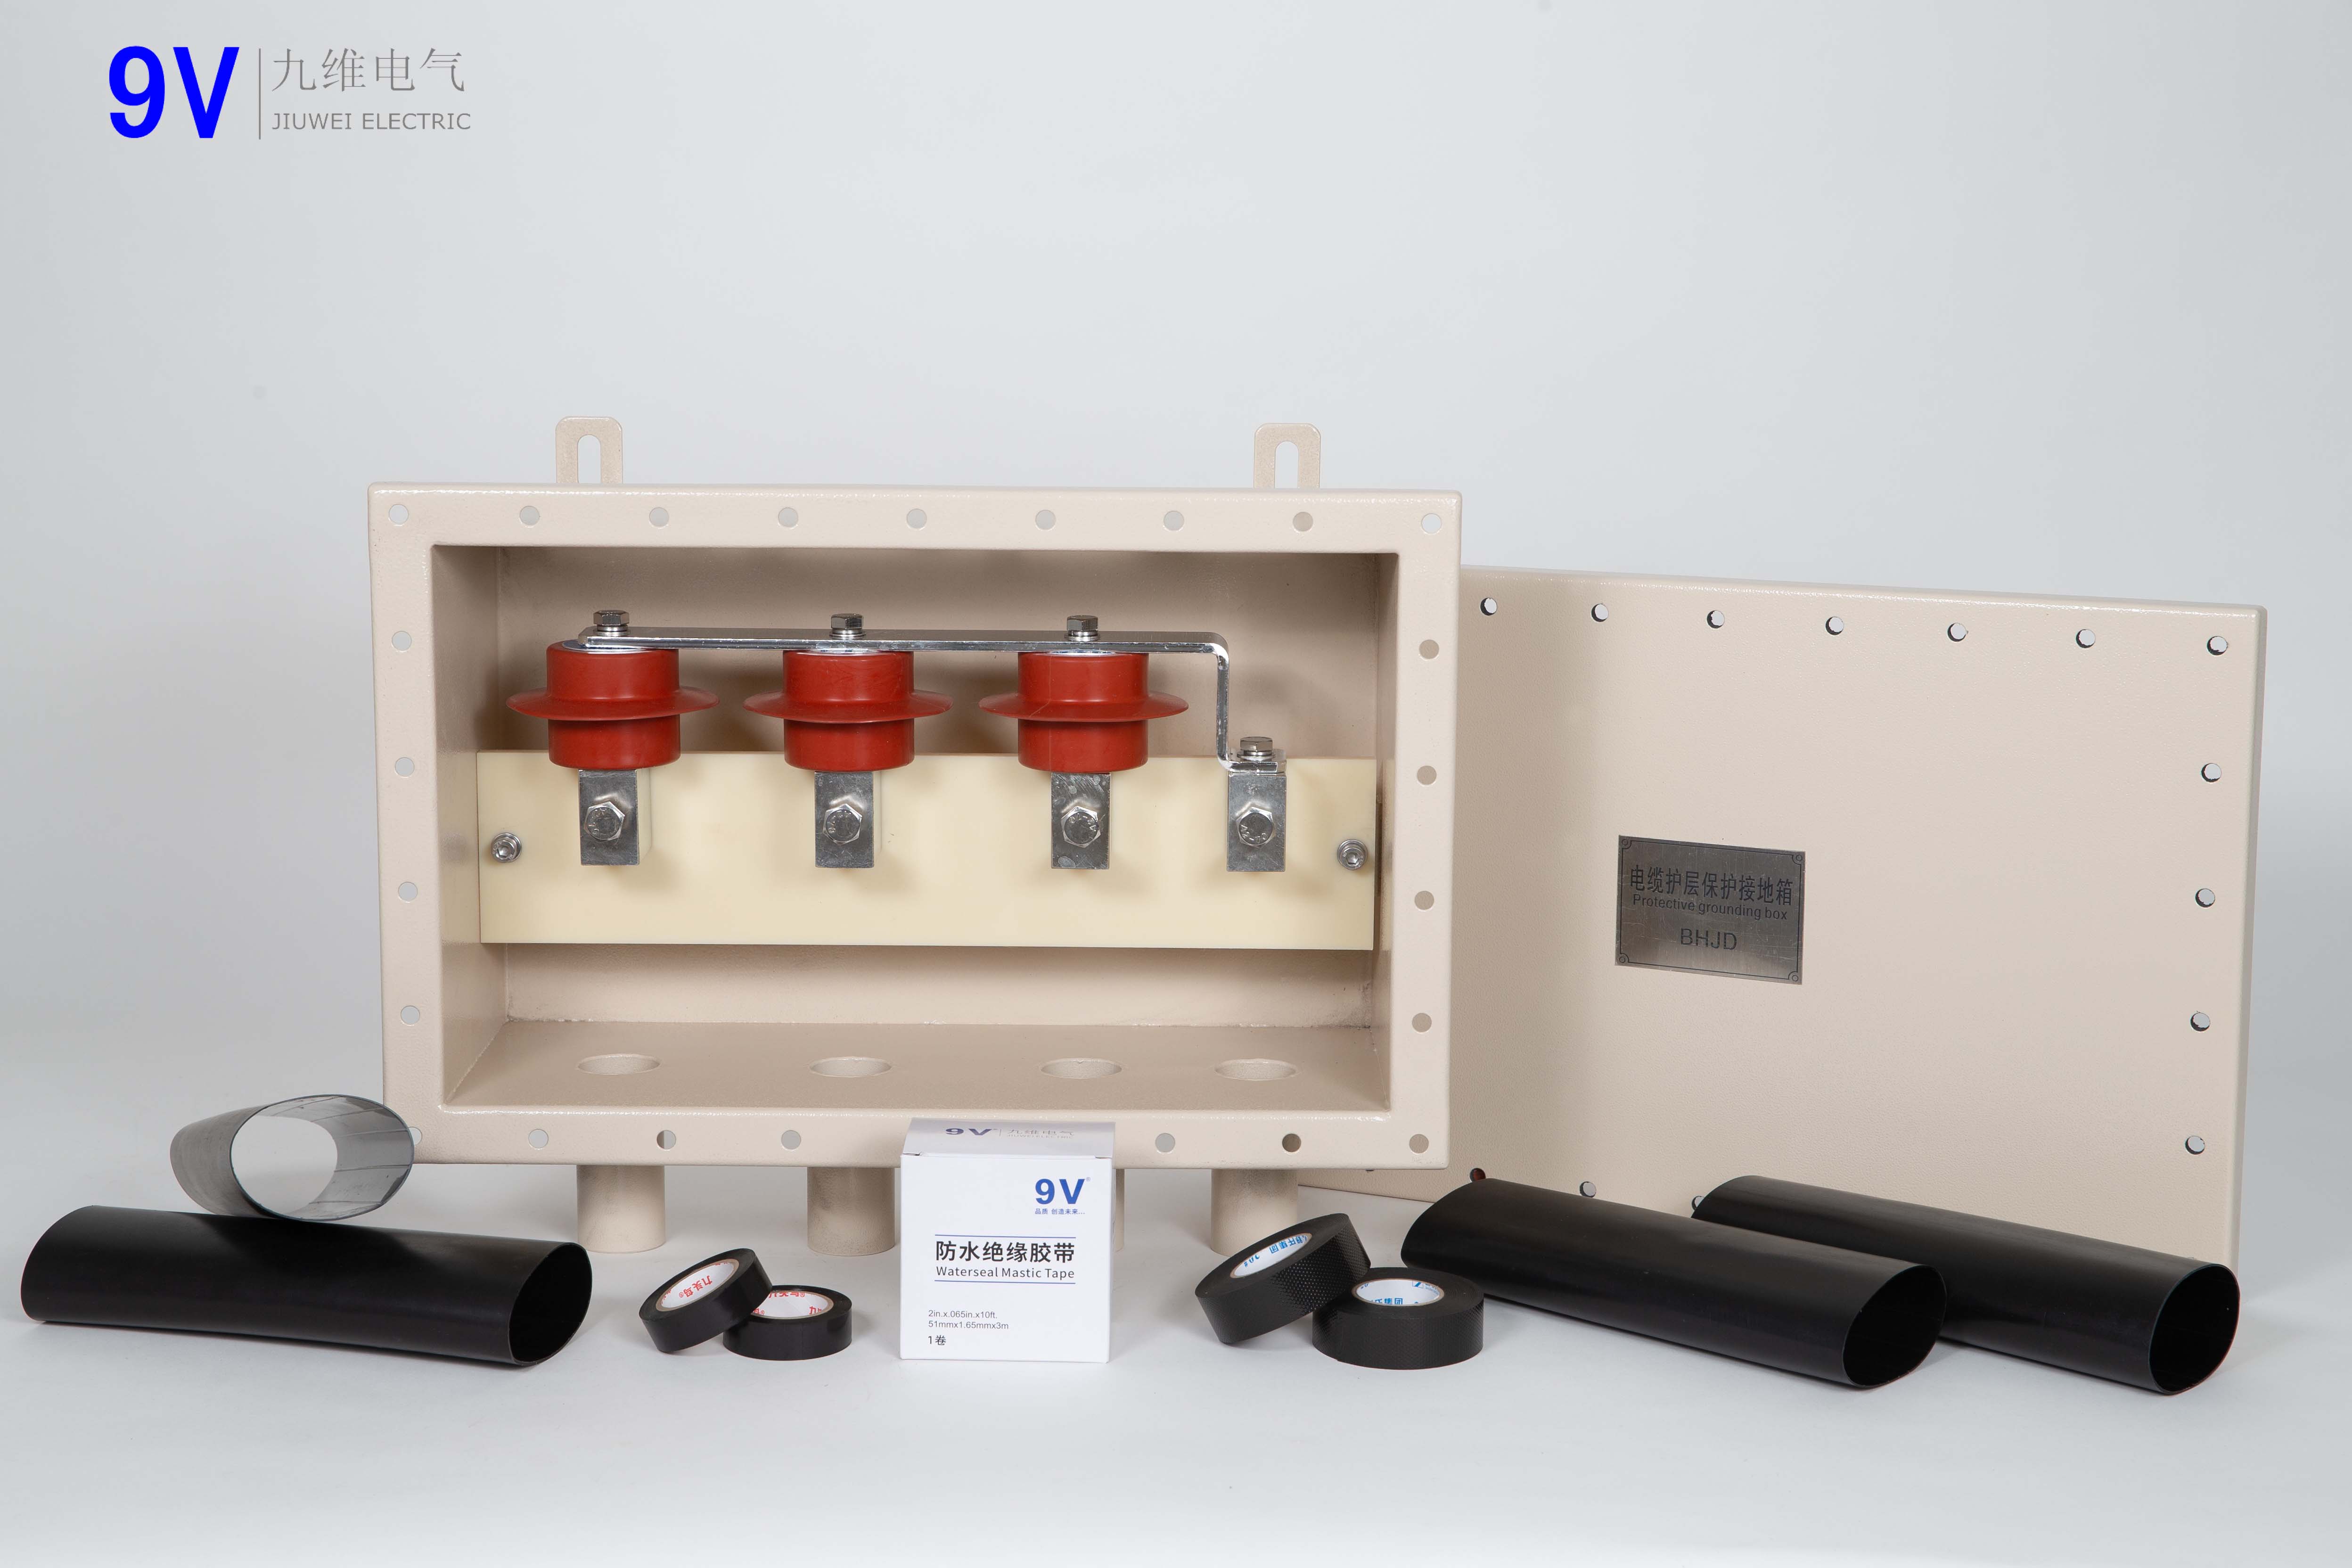 The value of the cable sheath grounding box